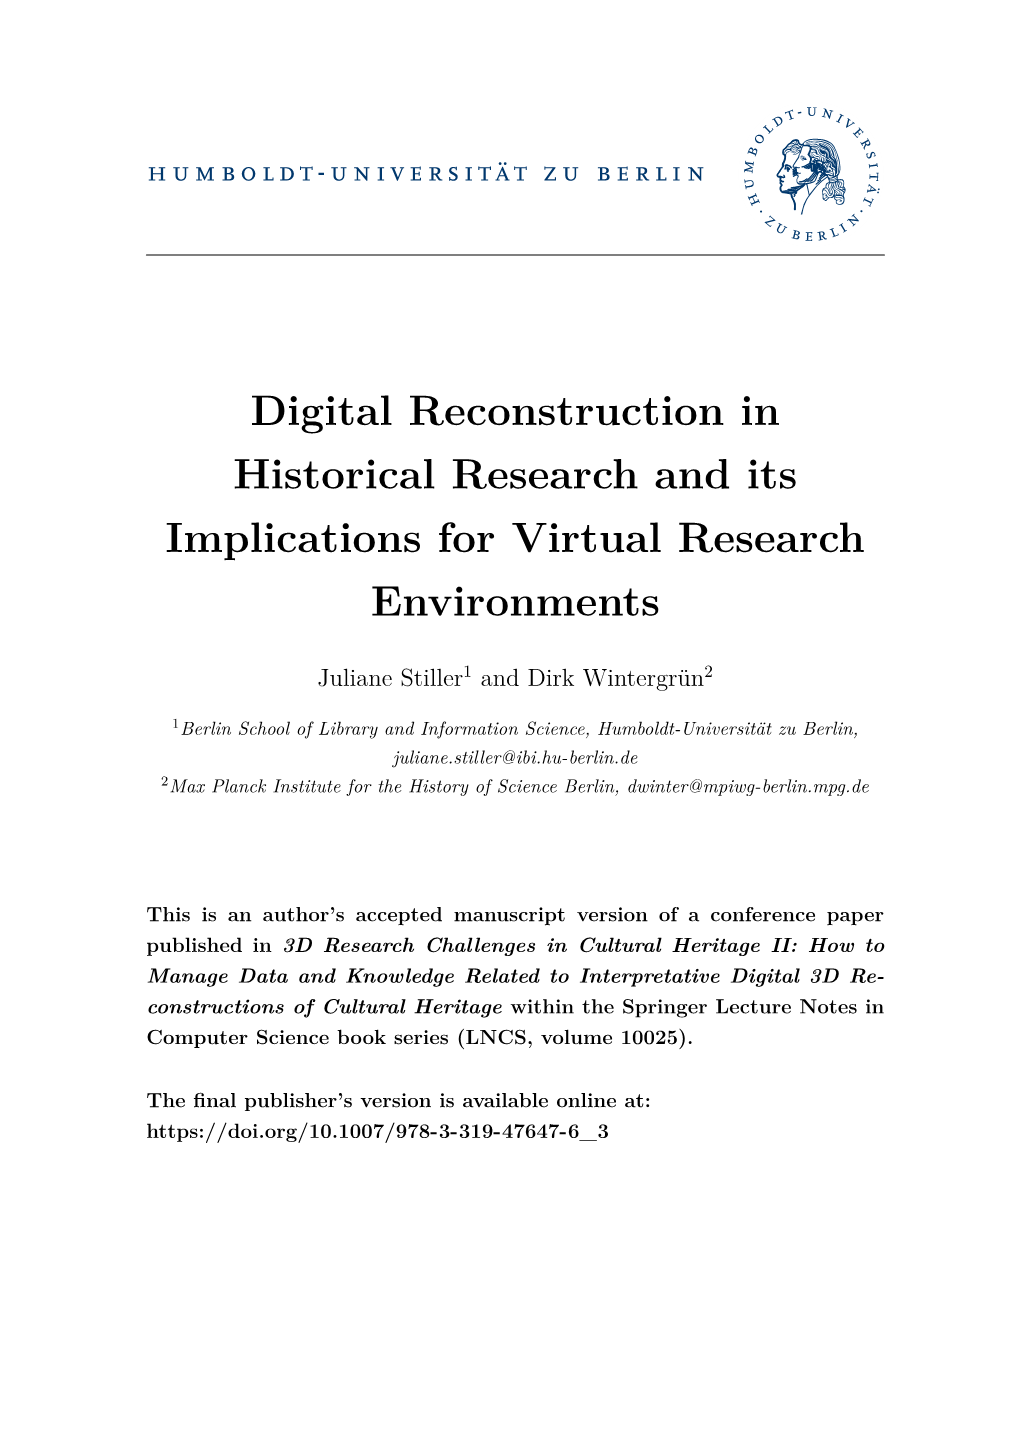 Digital Reconstruction in Historical Research and Its Implications for Virtual Research Environments